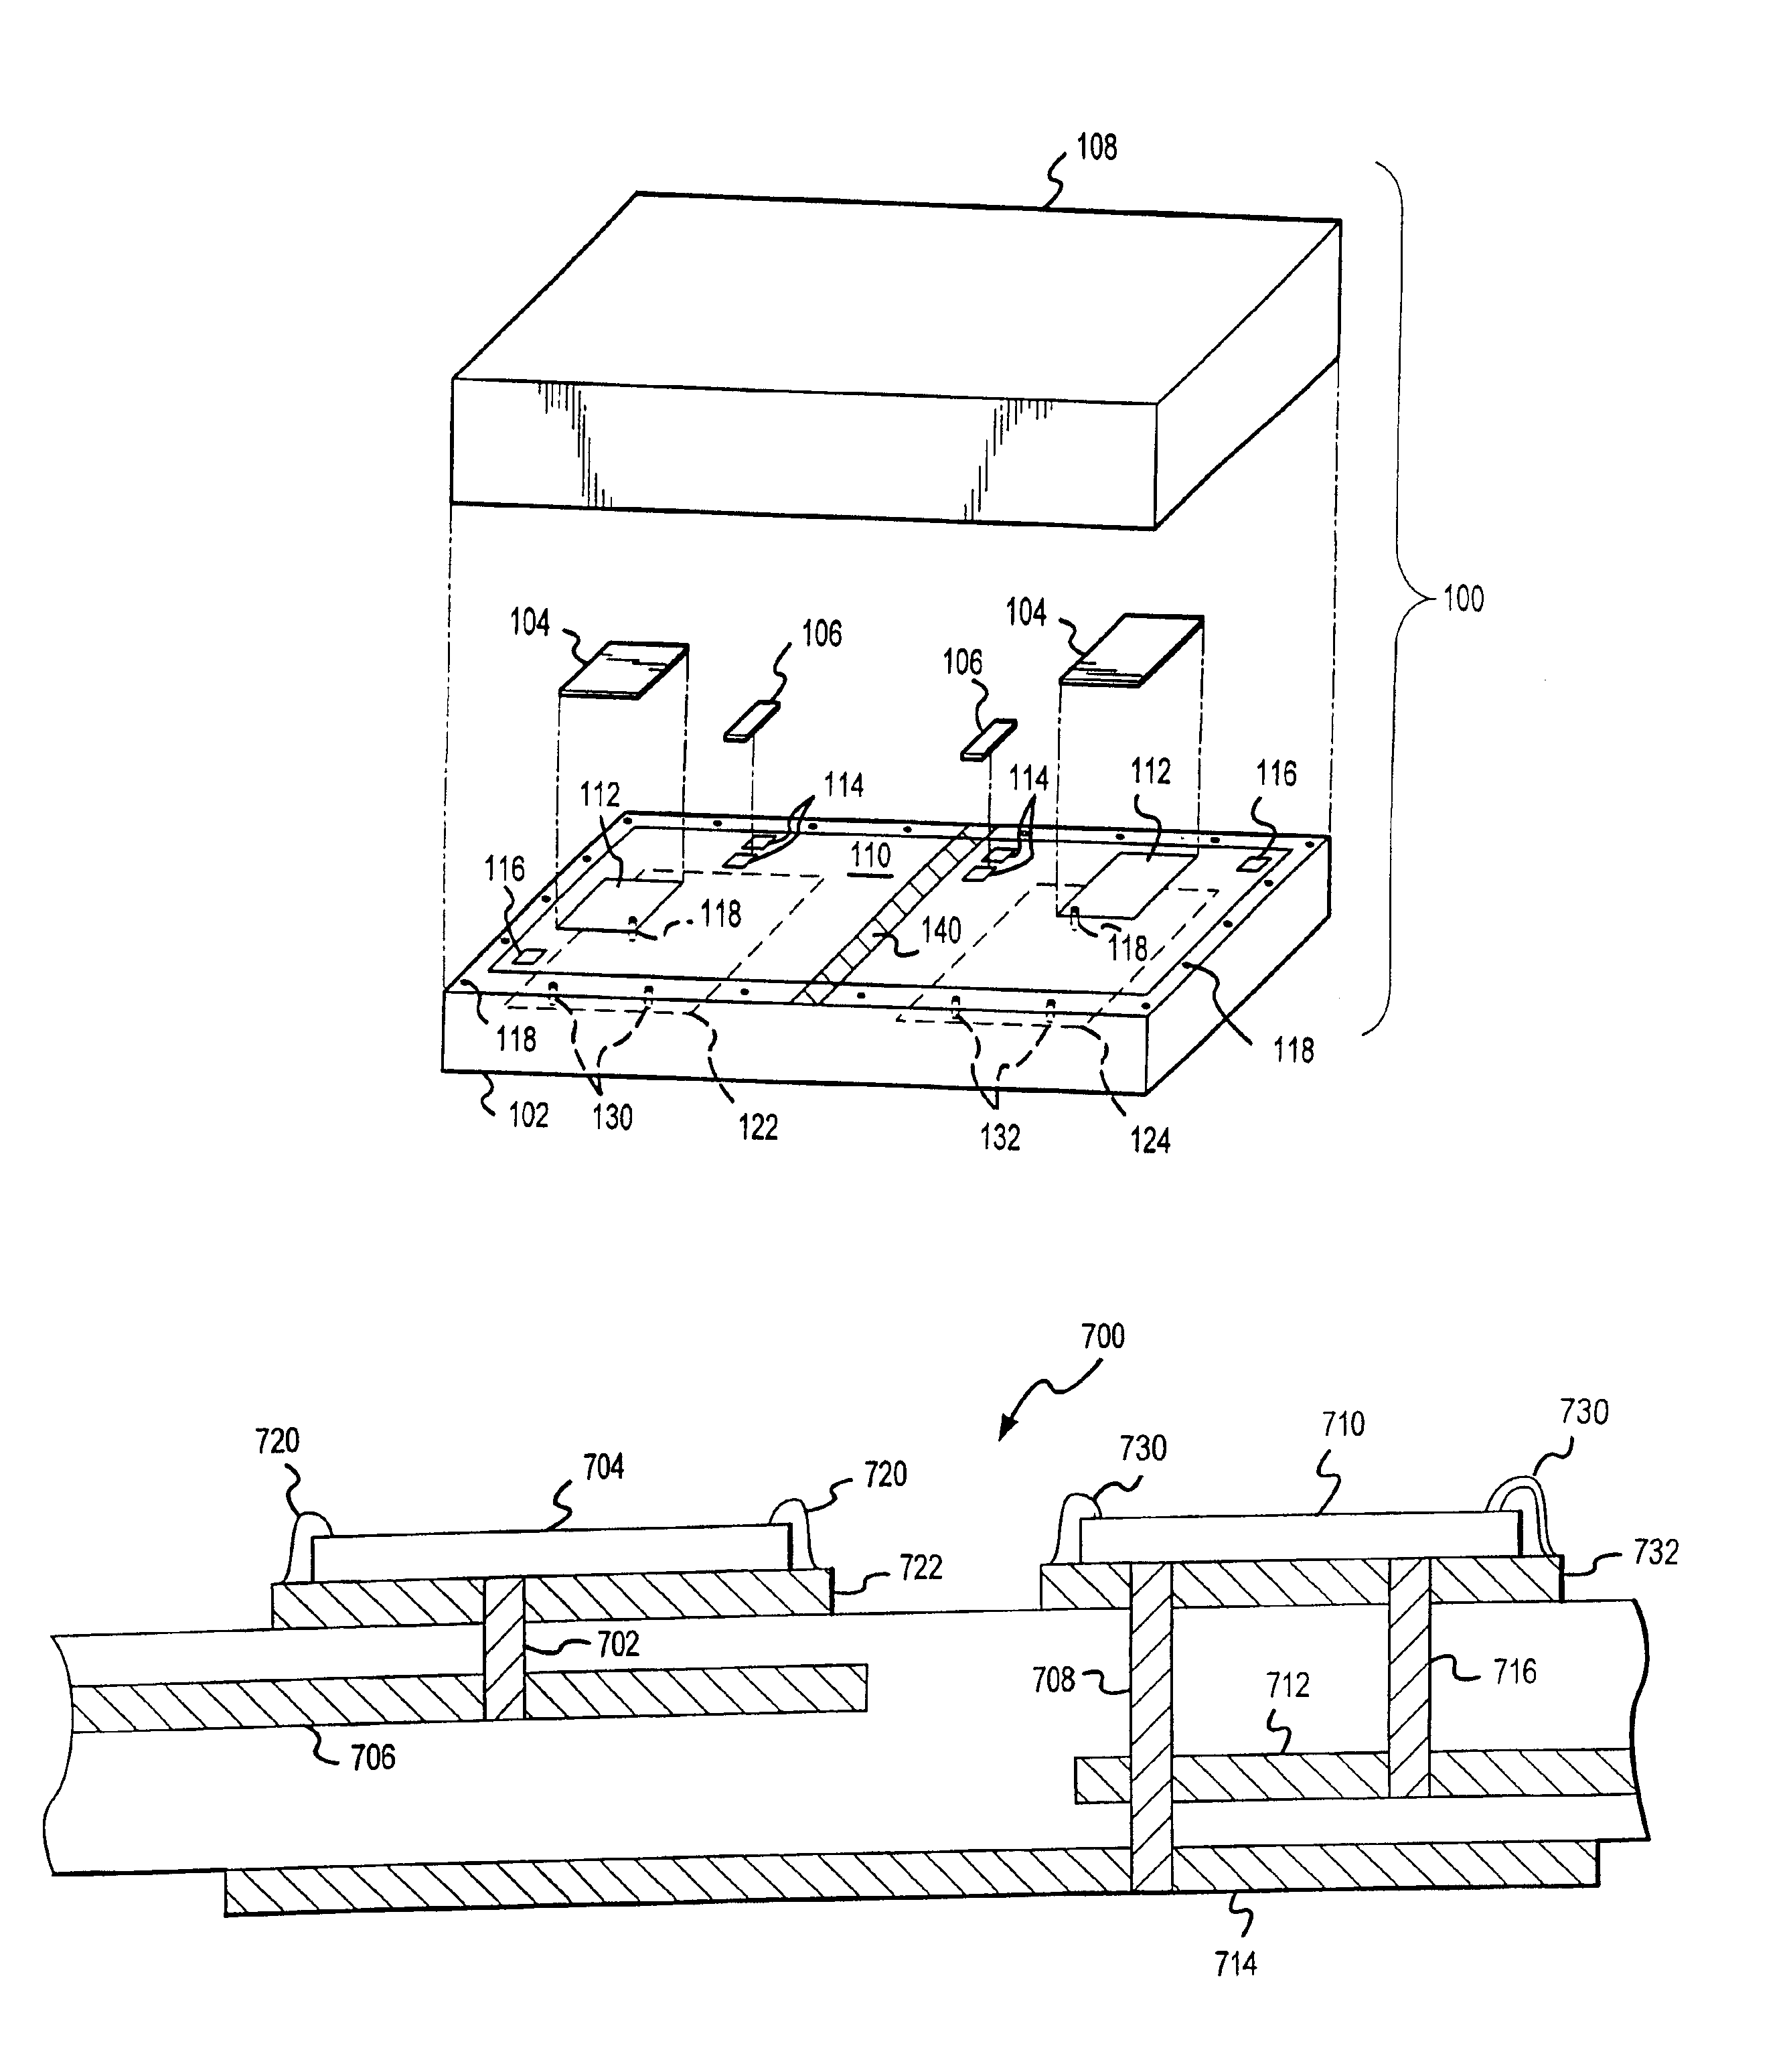 Multiple chip module with integrated RF capabilities